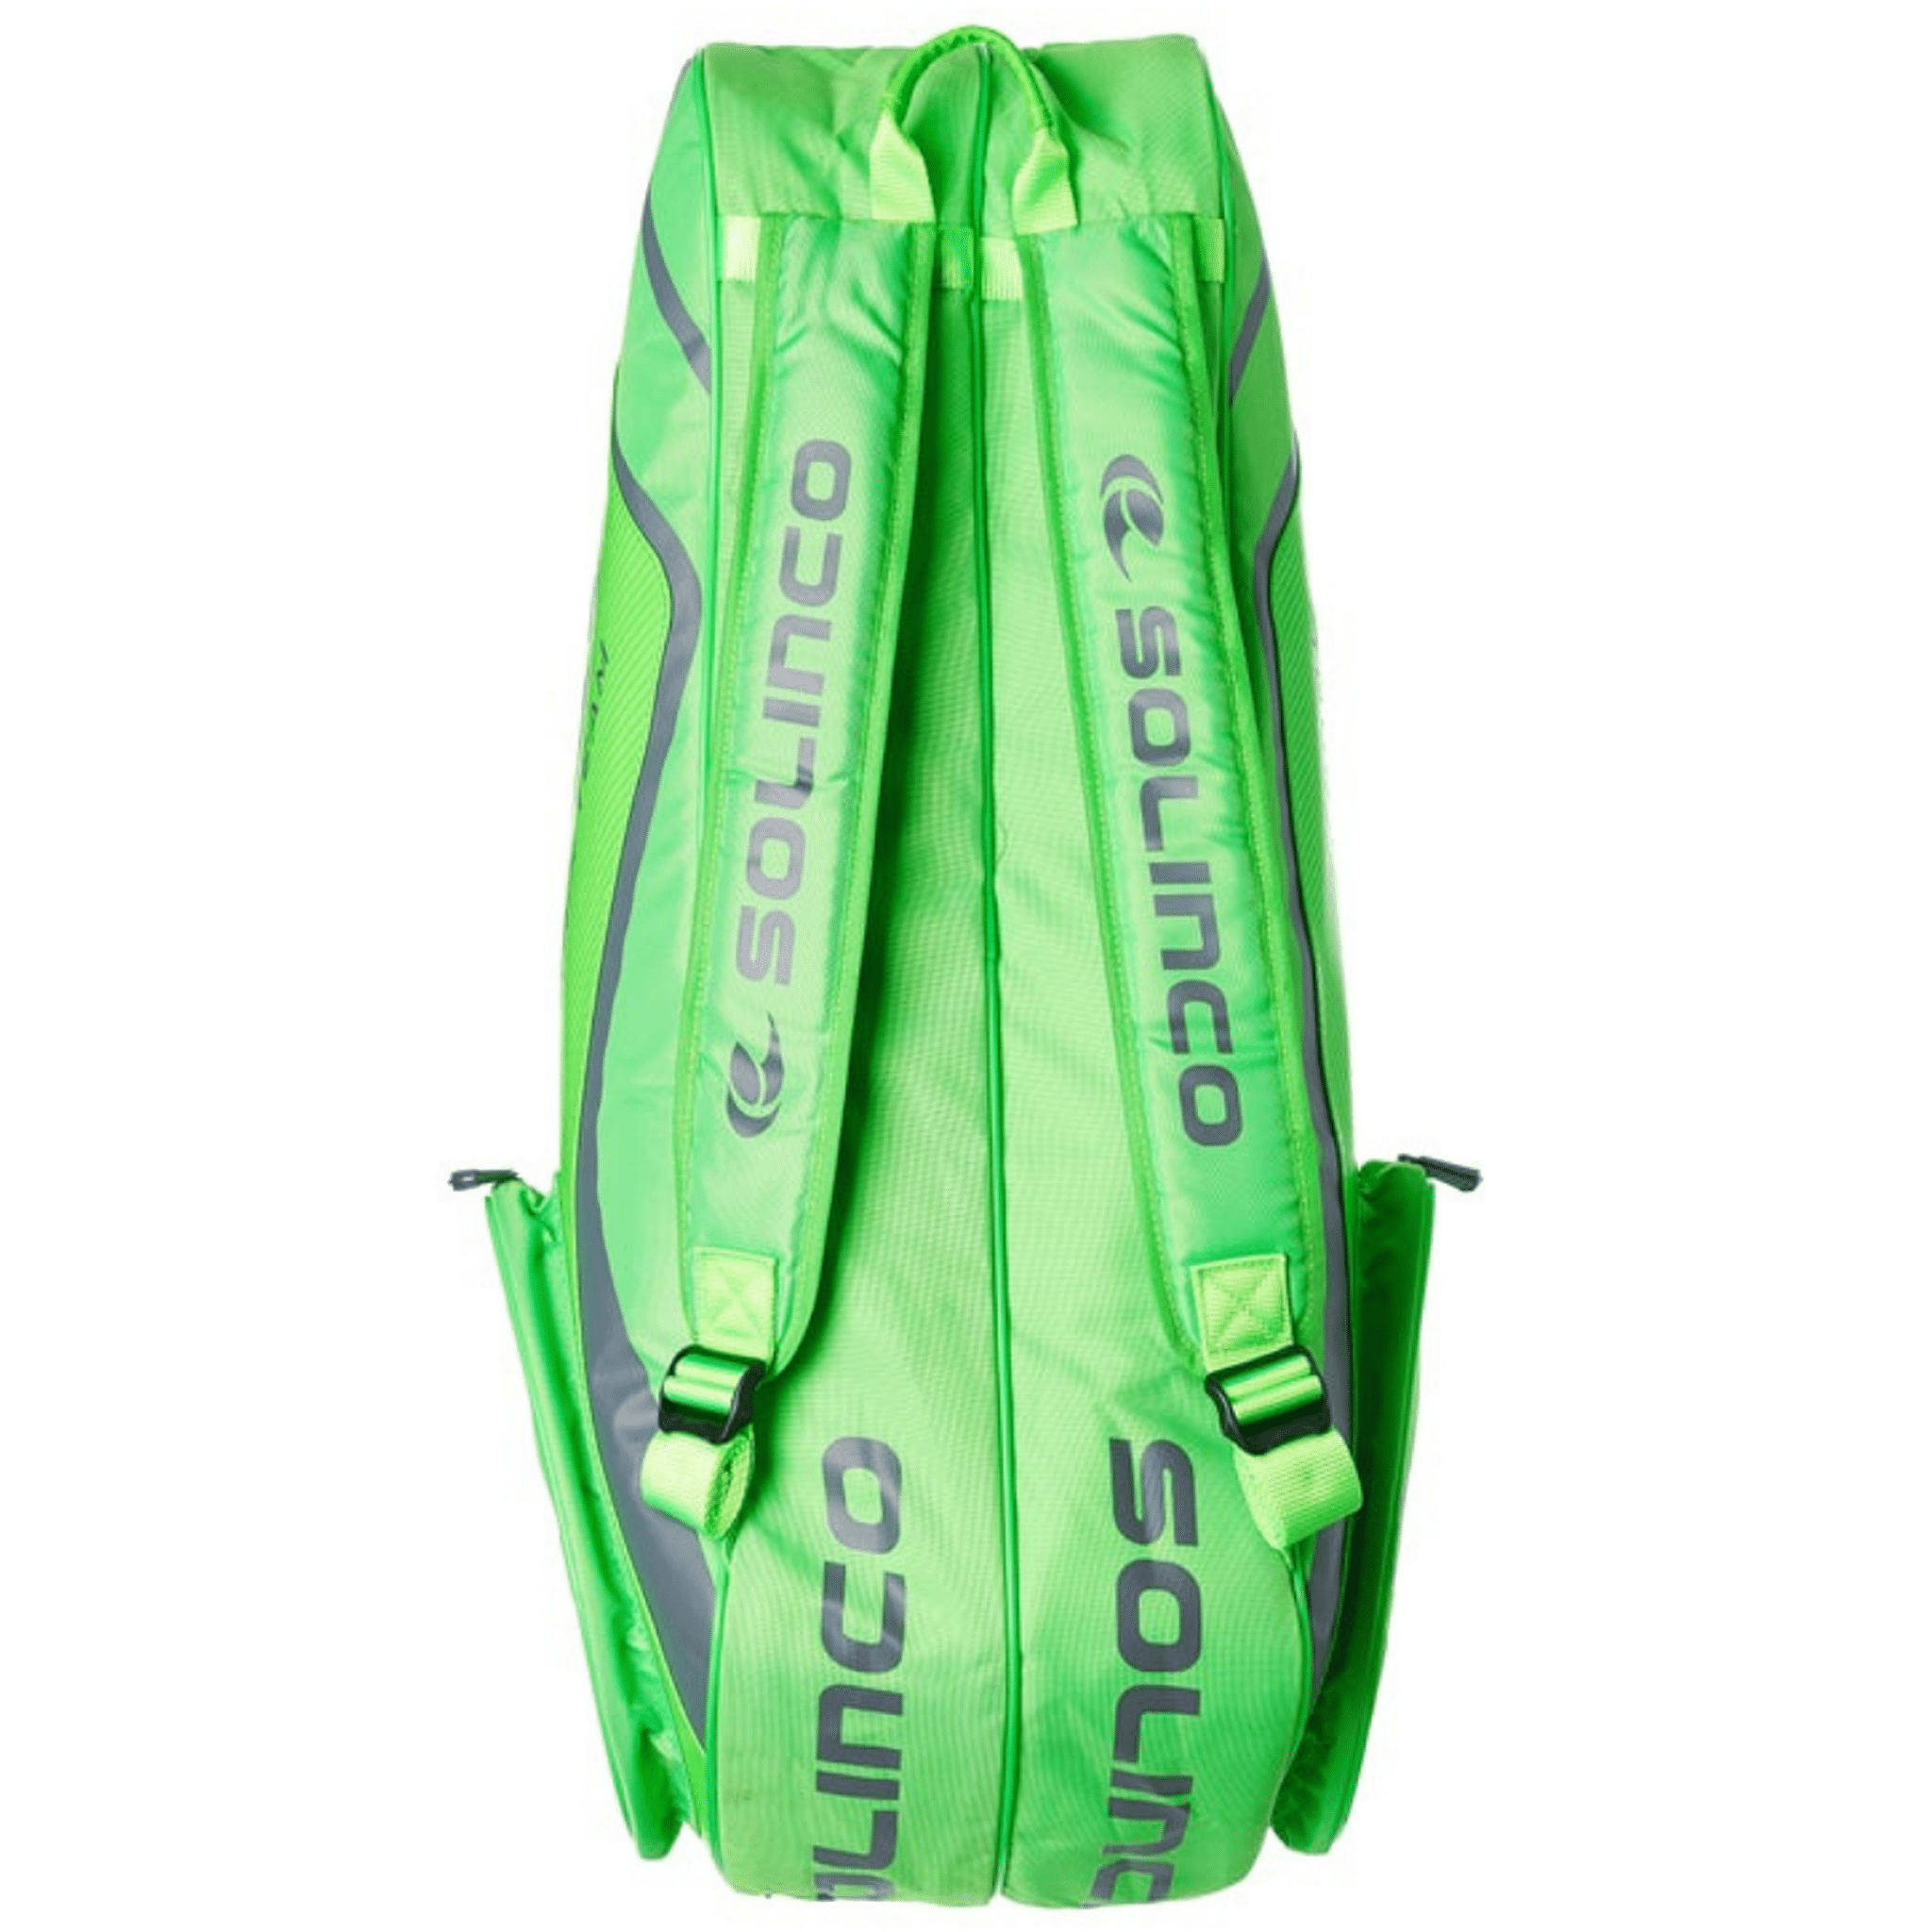 Solinco 6-Pack Tour Bag - Neon Green